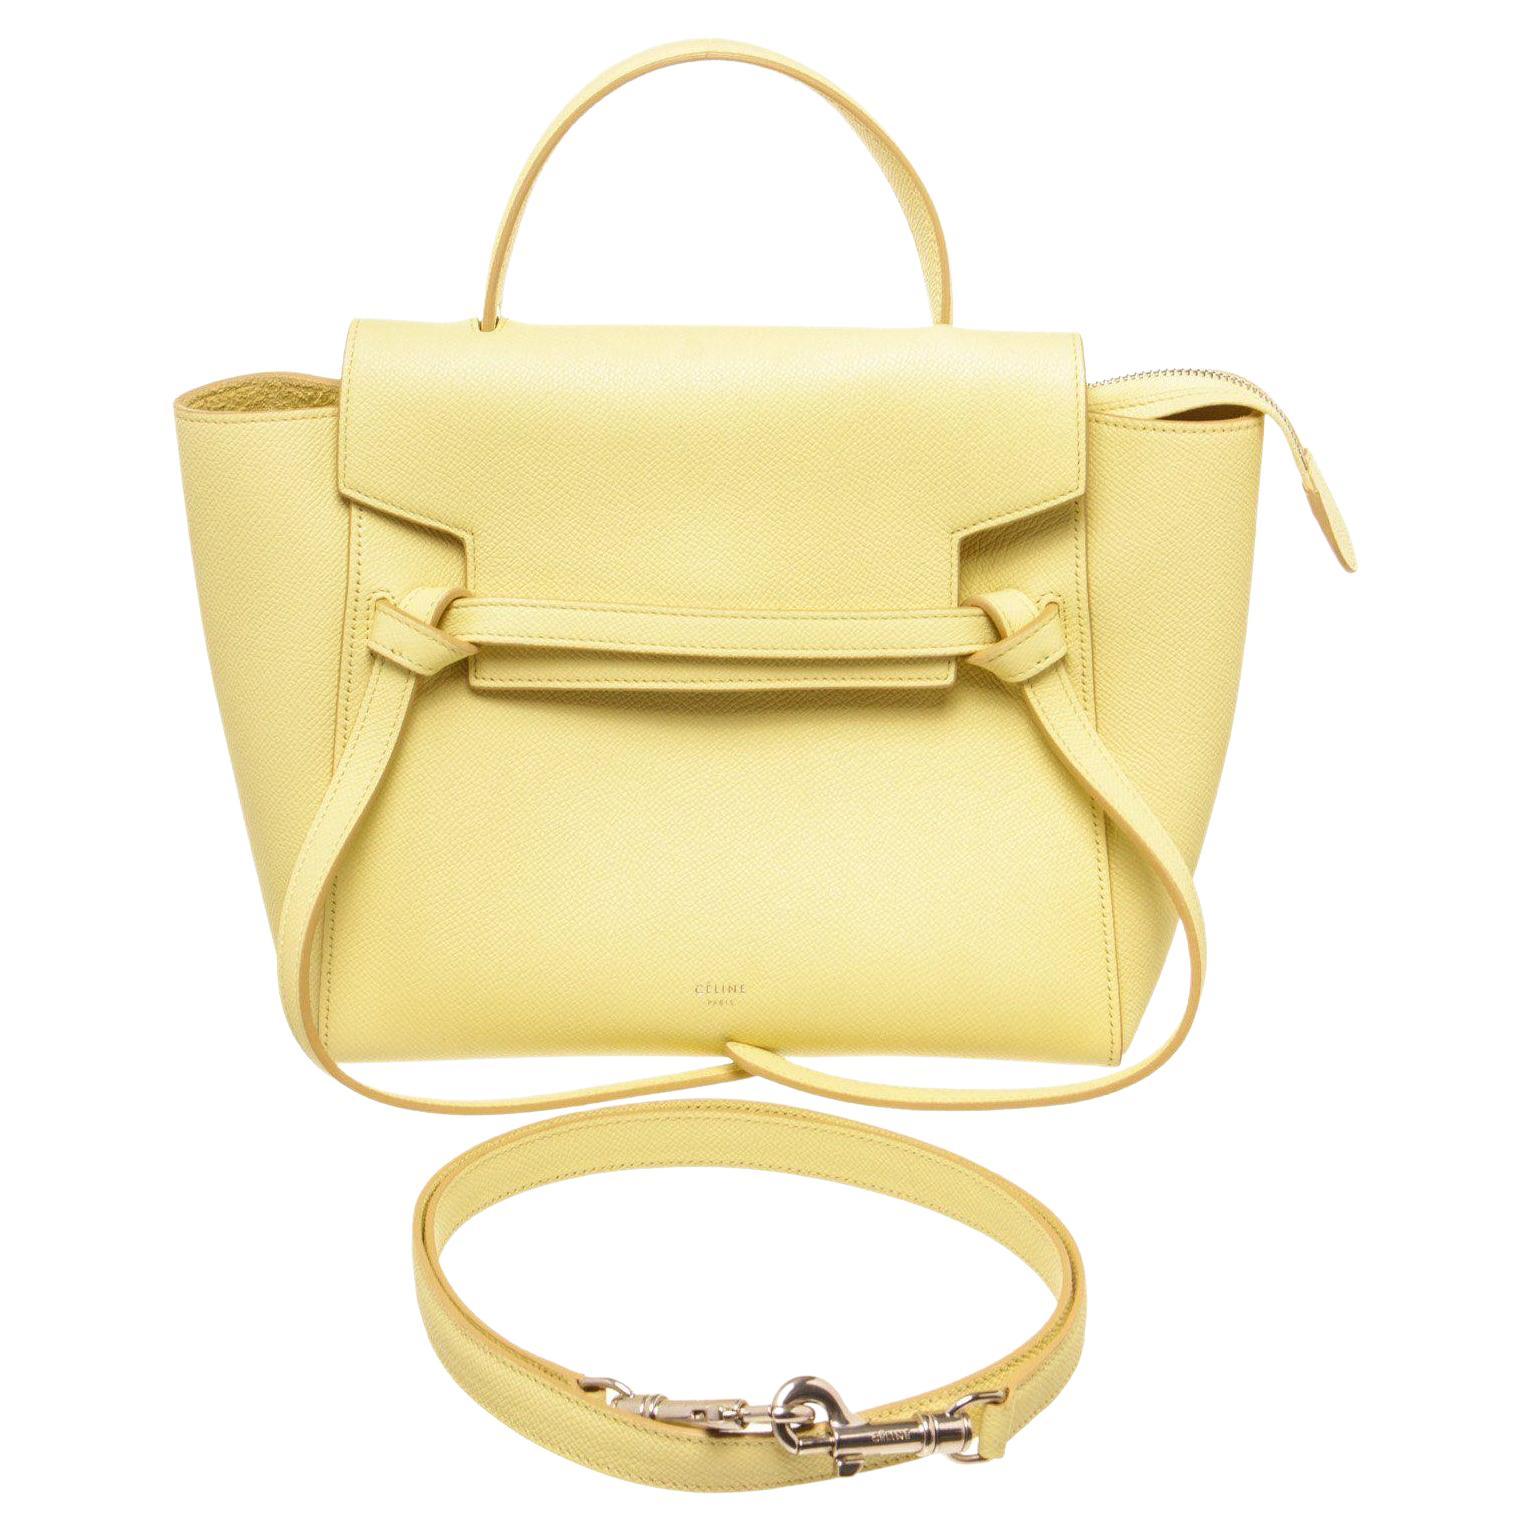 Celine Yellow Leather Micro Belt Bag Tex Shoulder Bag with leather